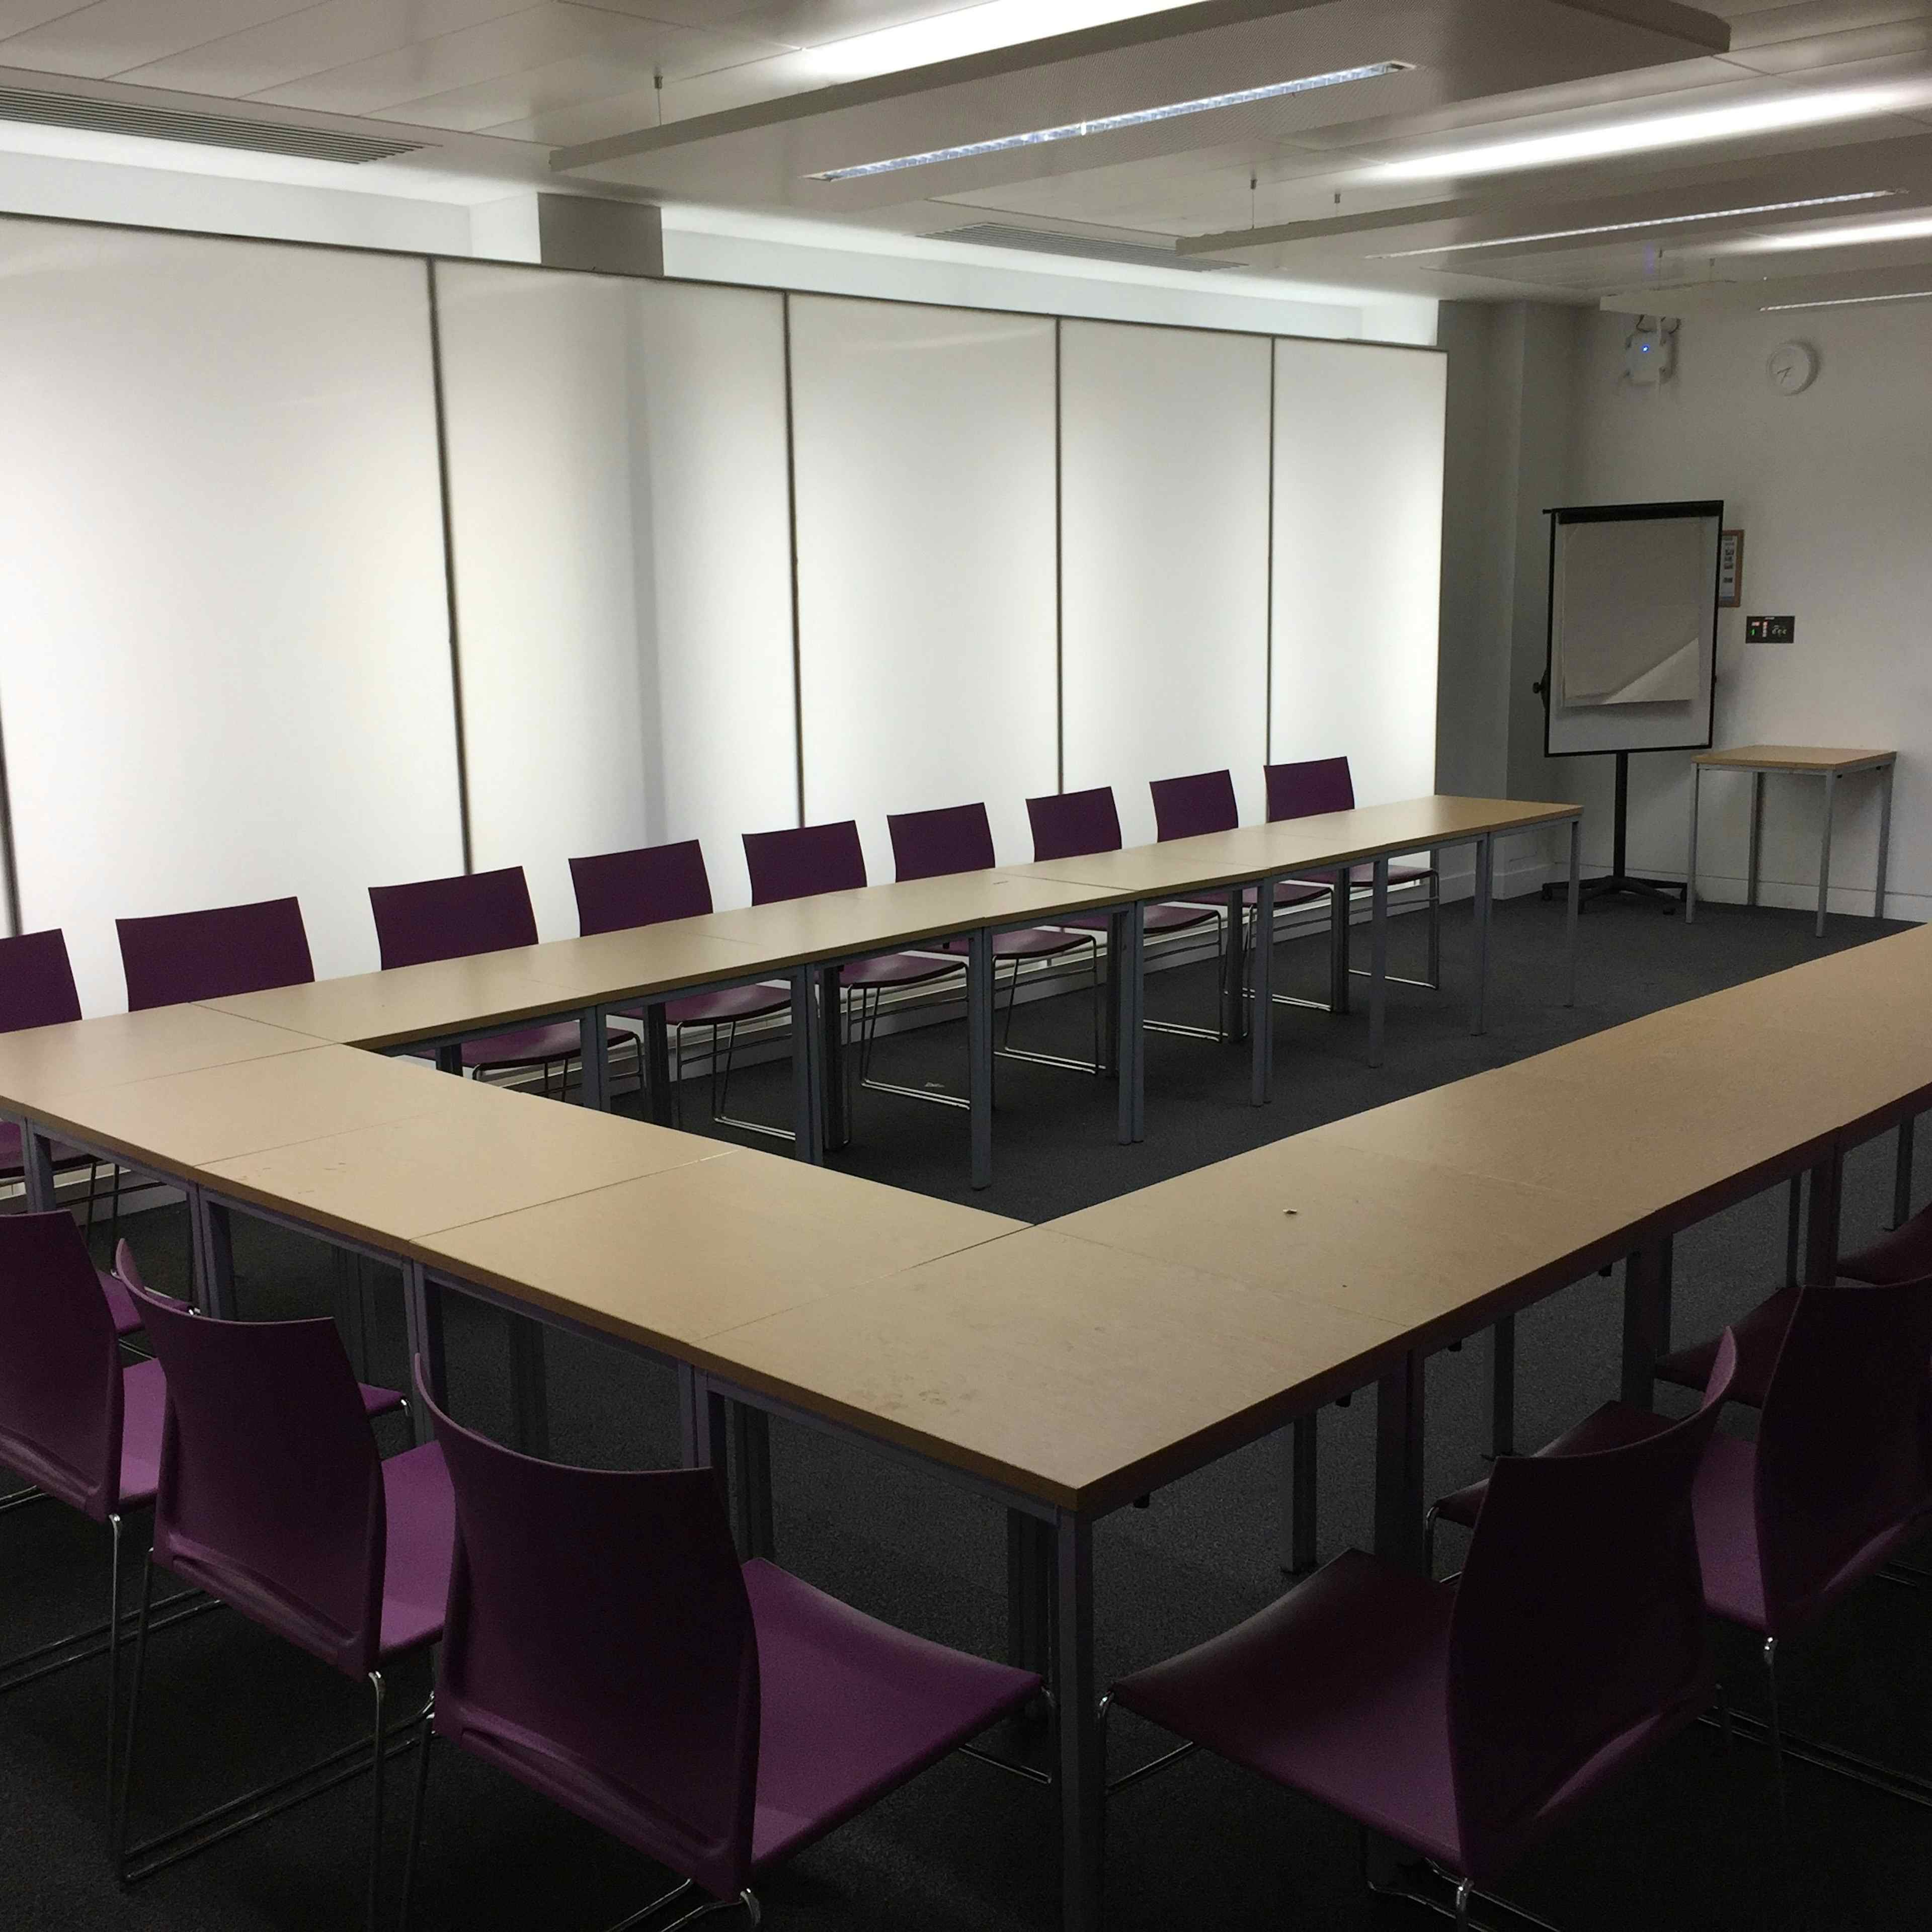 Queen Mary University Students' Union - Blomeley Room 1 image 2